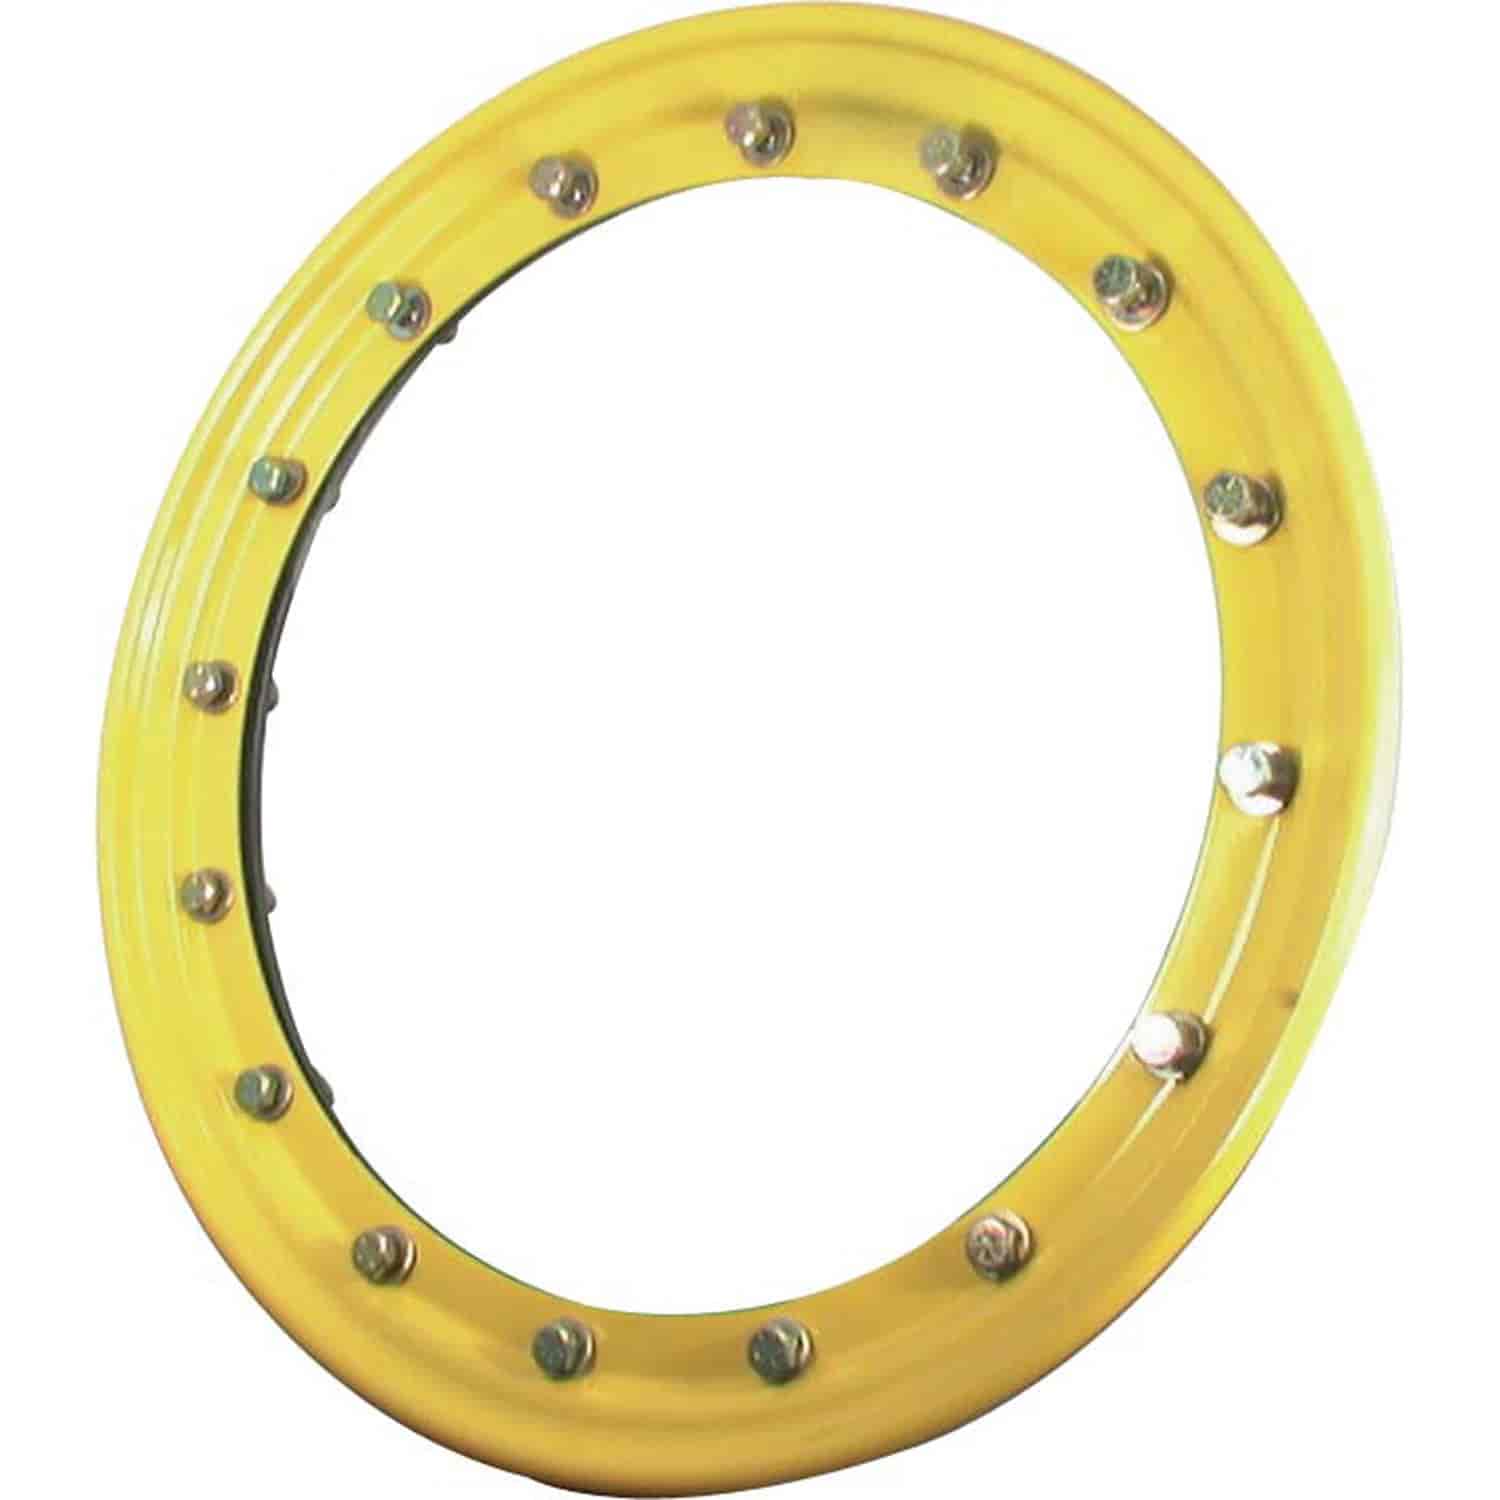 Safety Bead Lock For use with 15" Wheels